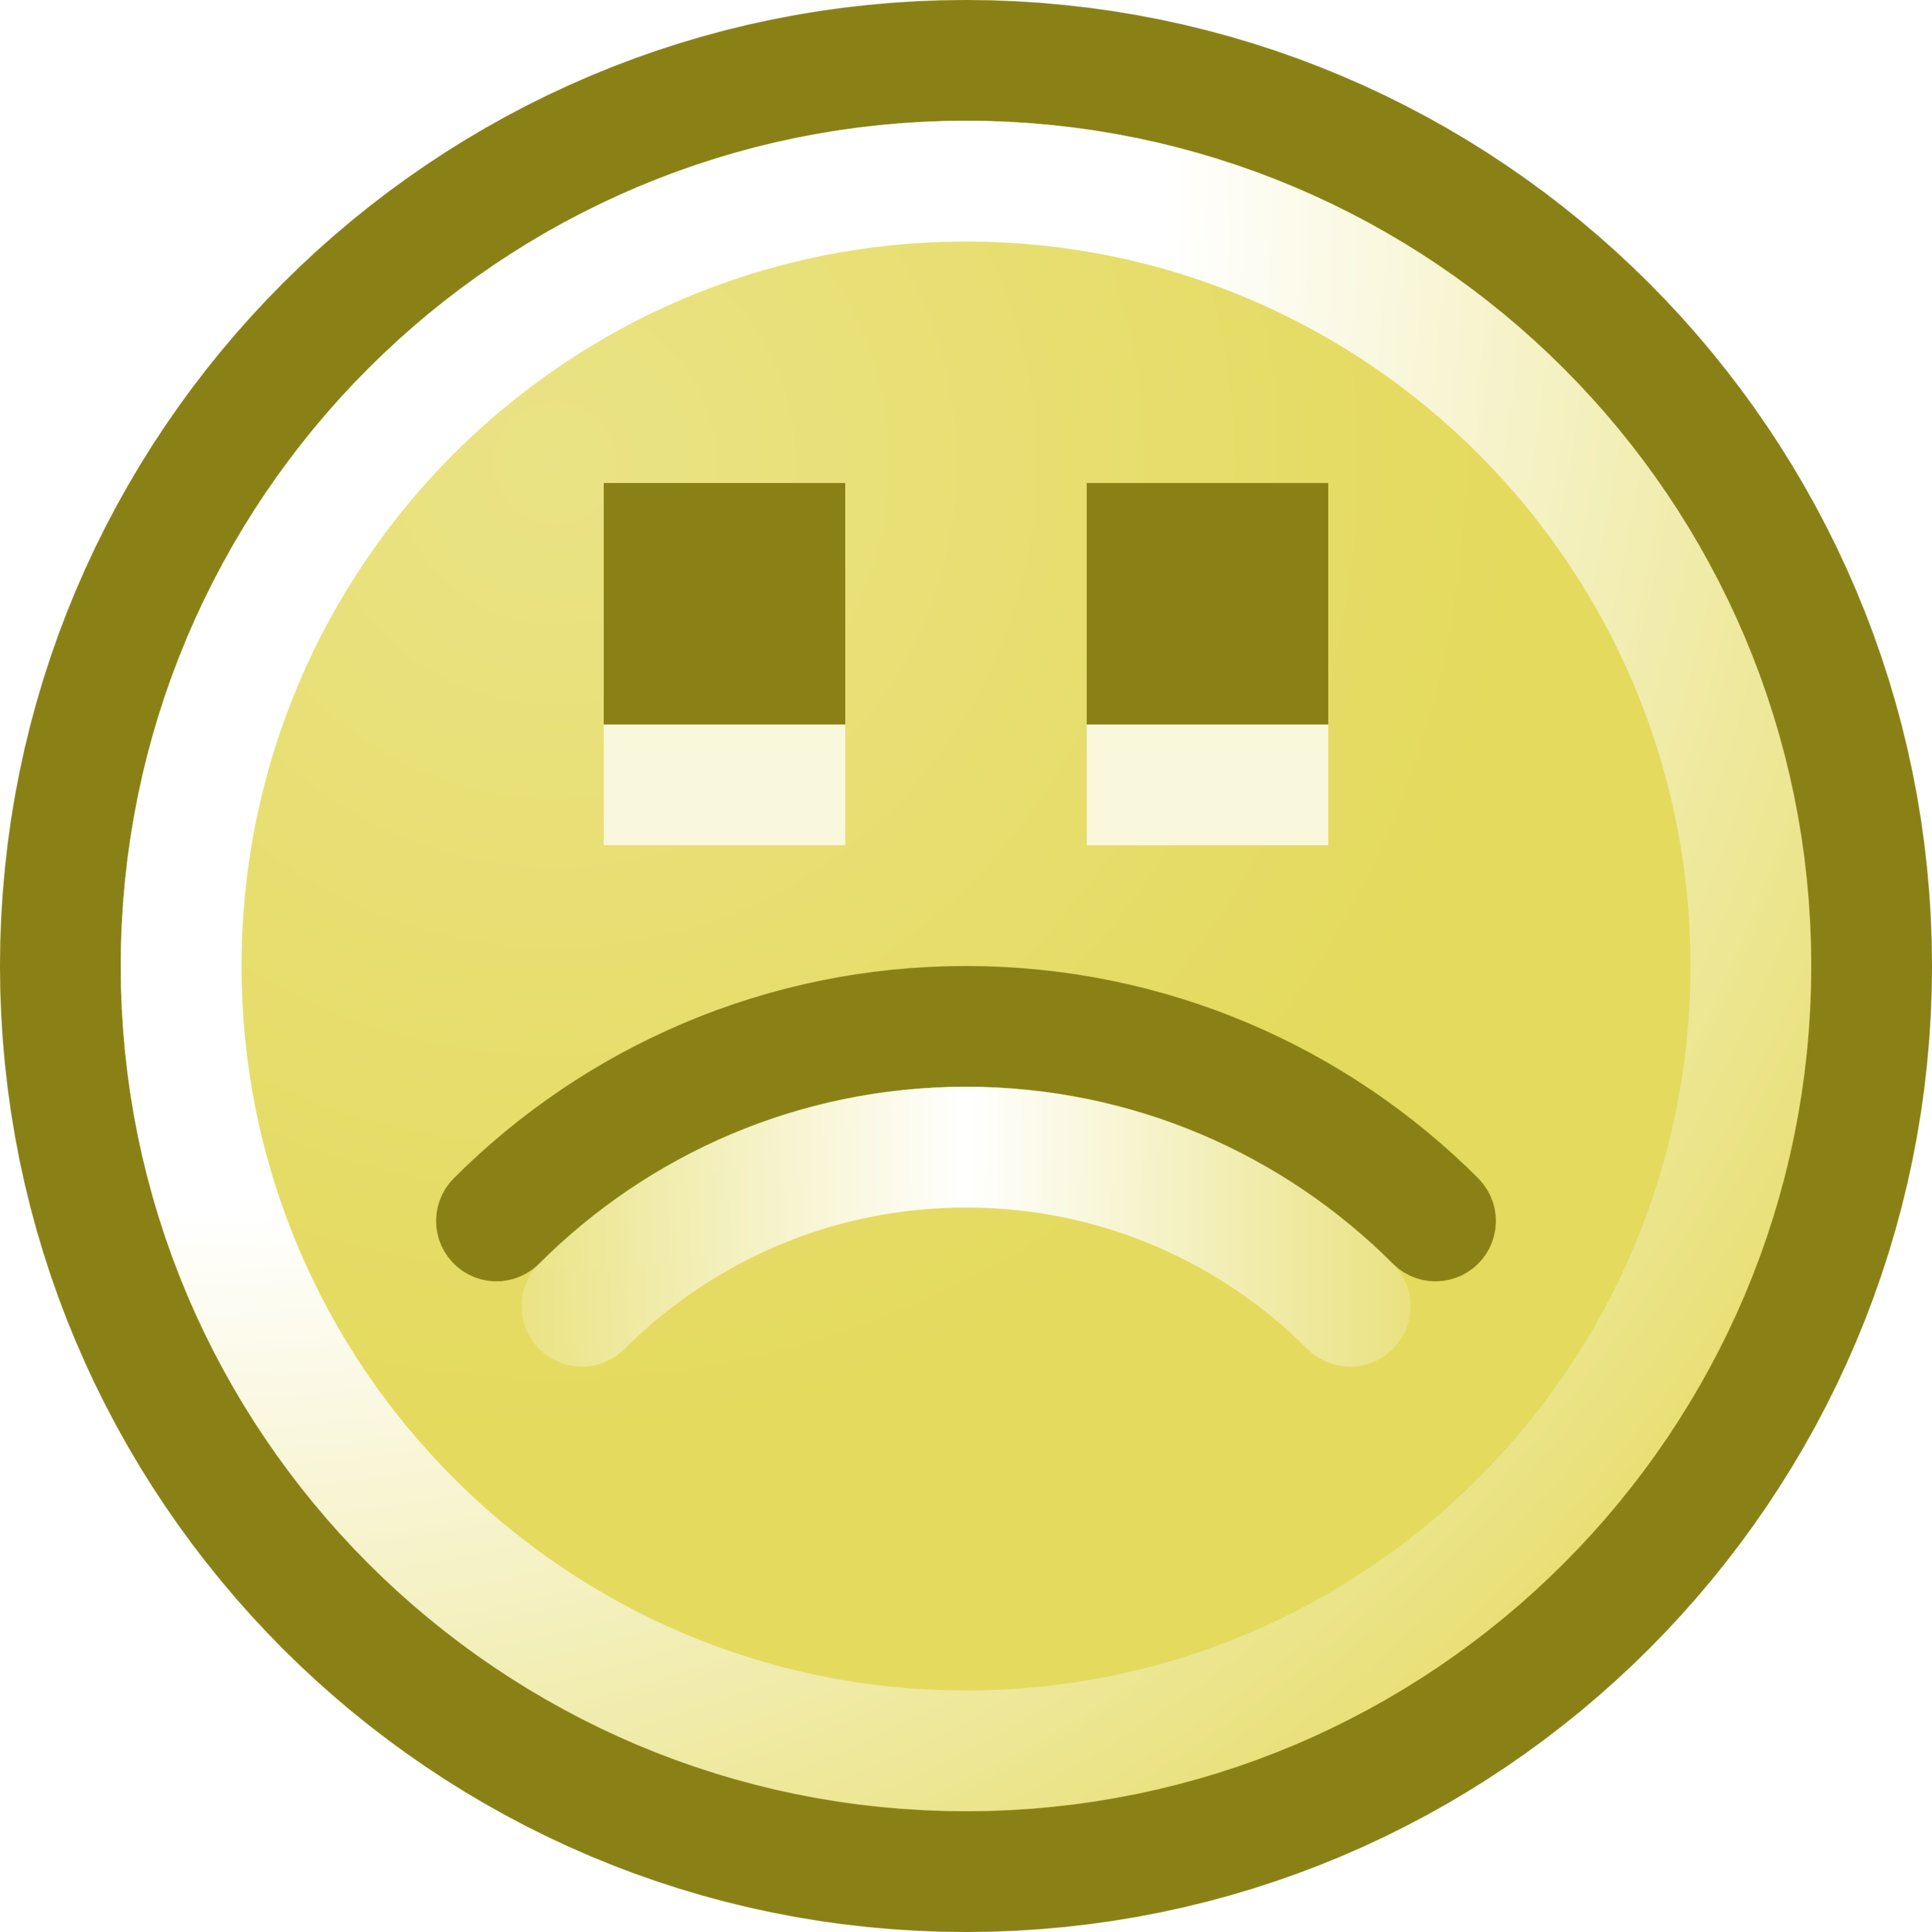 Frowning Faces Clipart - Free to use Clip Art Resource